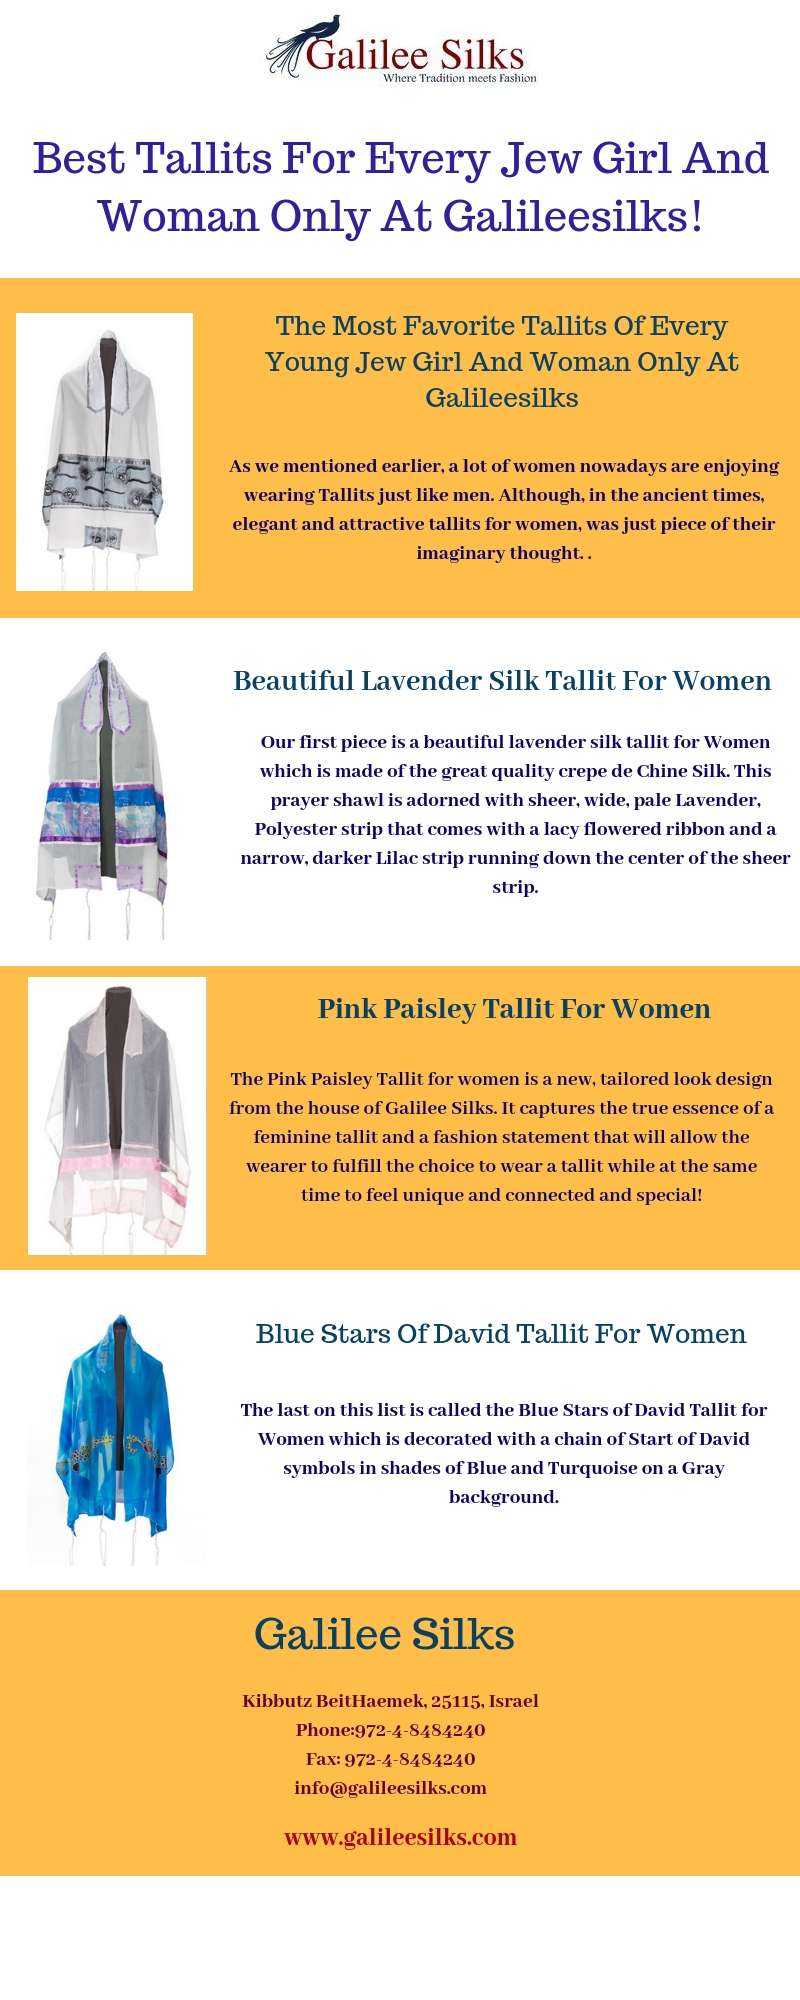 Best Tallits For Every Jew Girl And Woman Only At Galileesilks!(1).jpg With the increased numbers of women wearing Tallits nowadays, having a convenient store that specialize in Tallits for women can come real handy. For more details, visit this link: https://bit.ly/2Qw6tkY by amramrafi